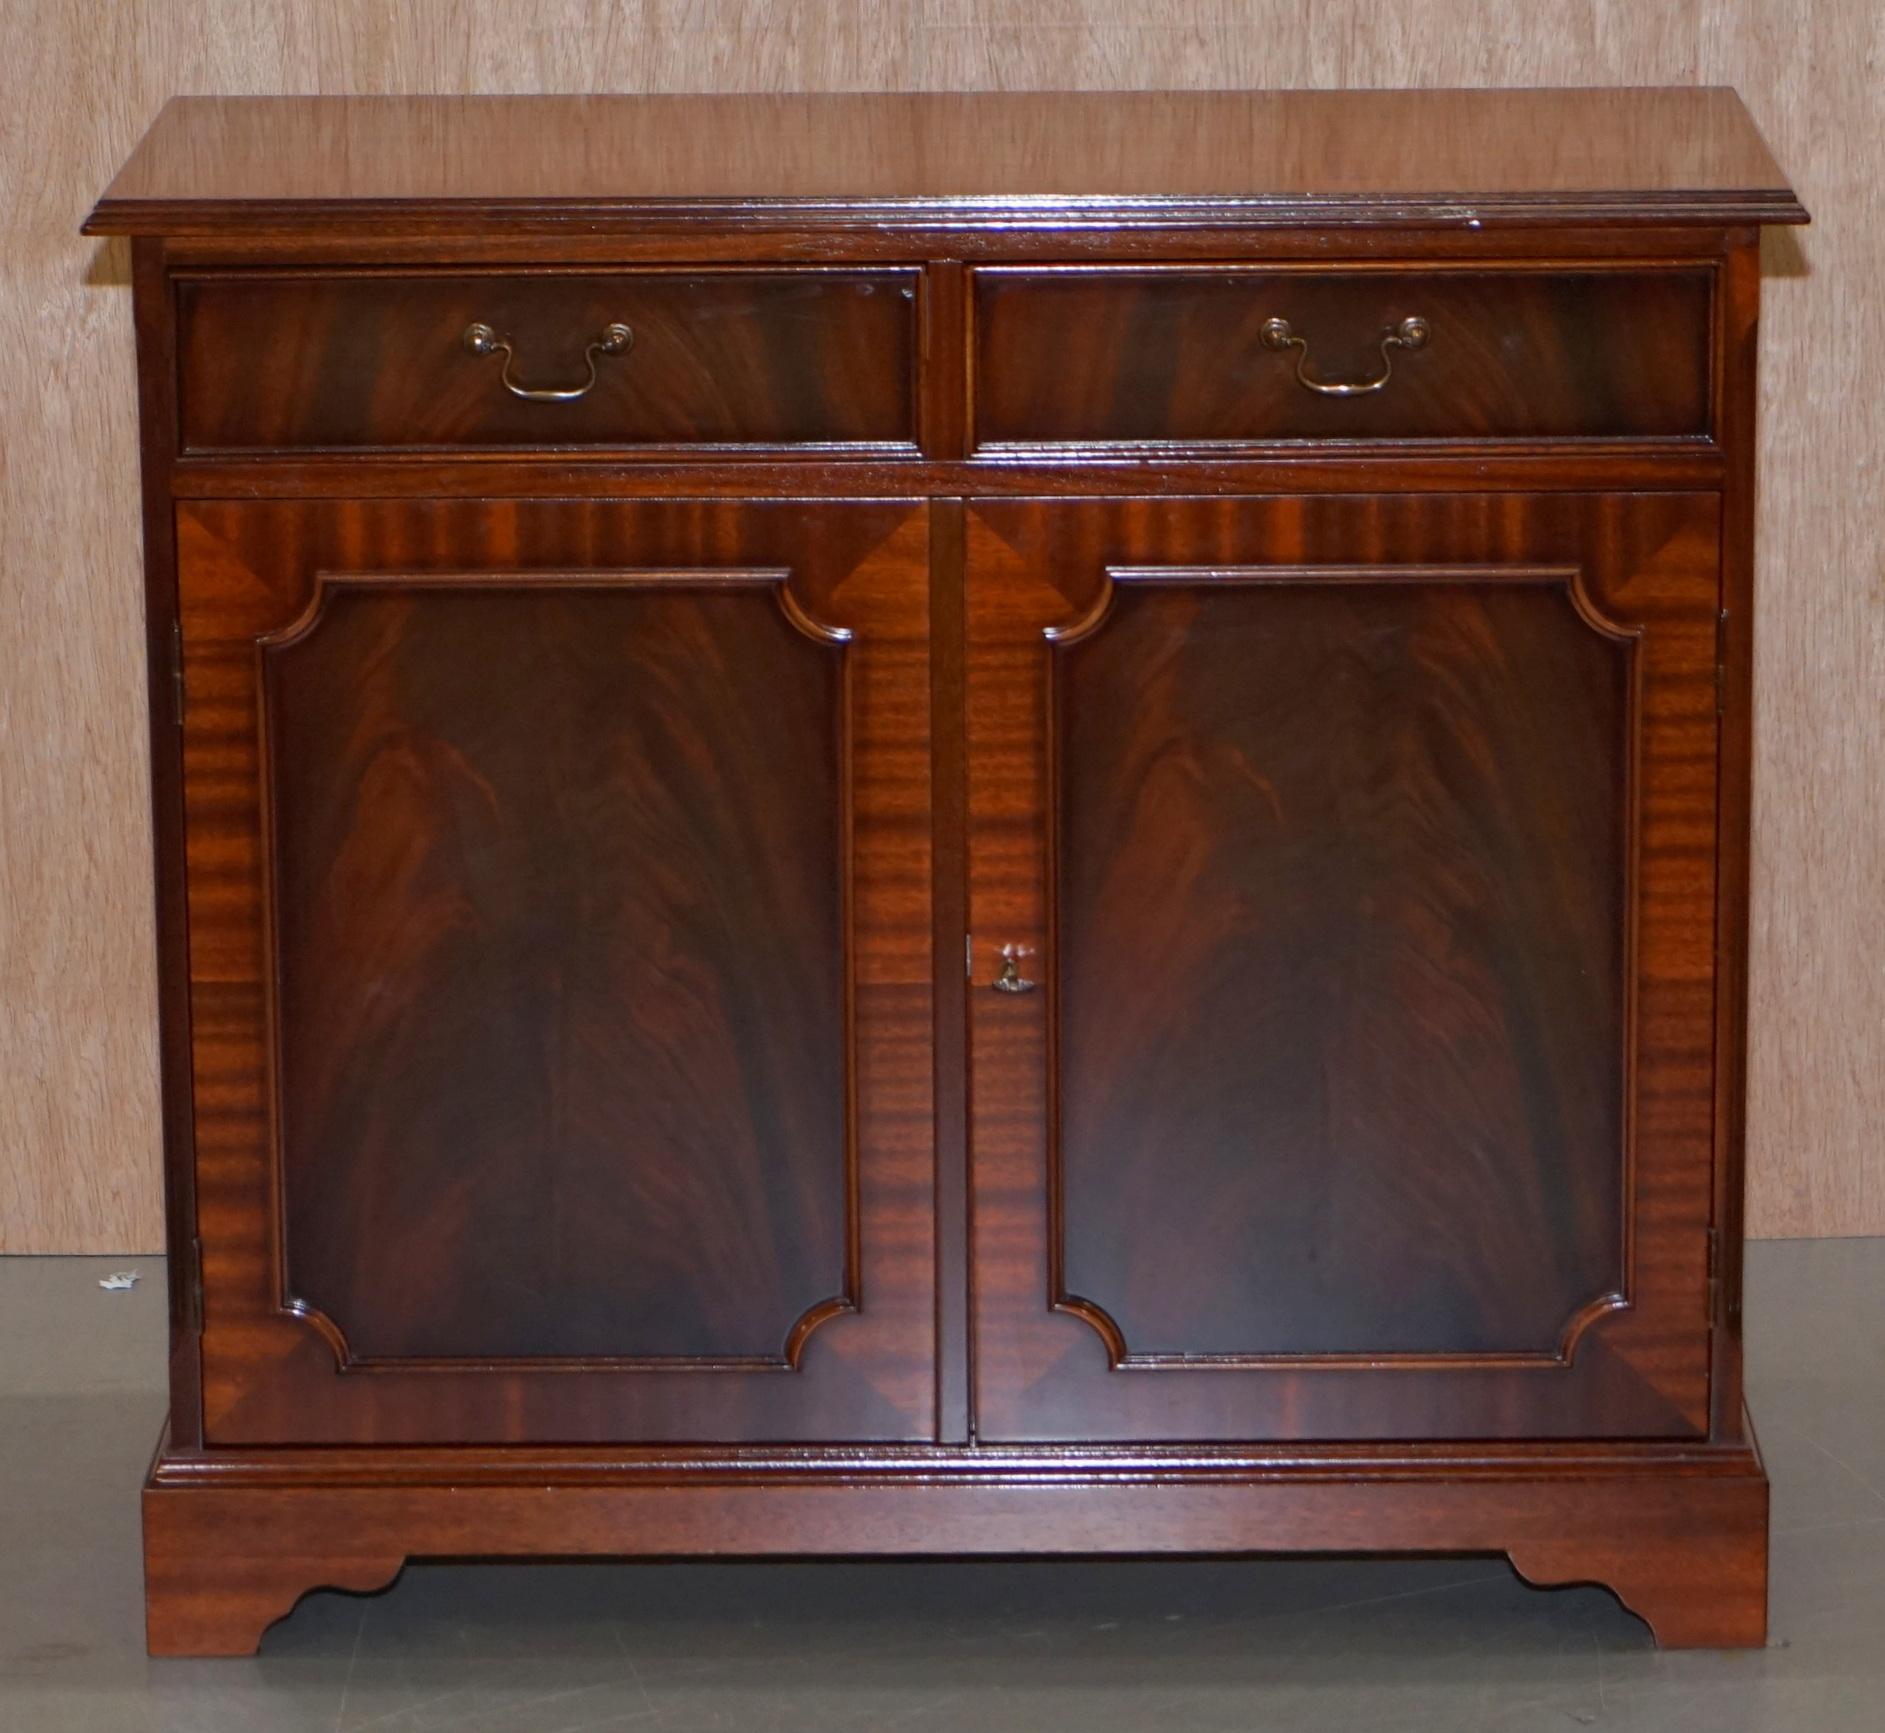 We are delighted to offer for sale this very well made flamed mahogany cupboard with twin drawers to the top

A very good looking and well made piece, it has one large cupboard base with single removable shelf and two good sized drawers. The back